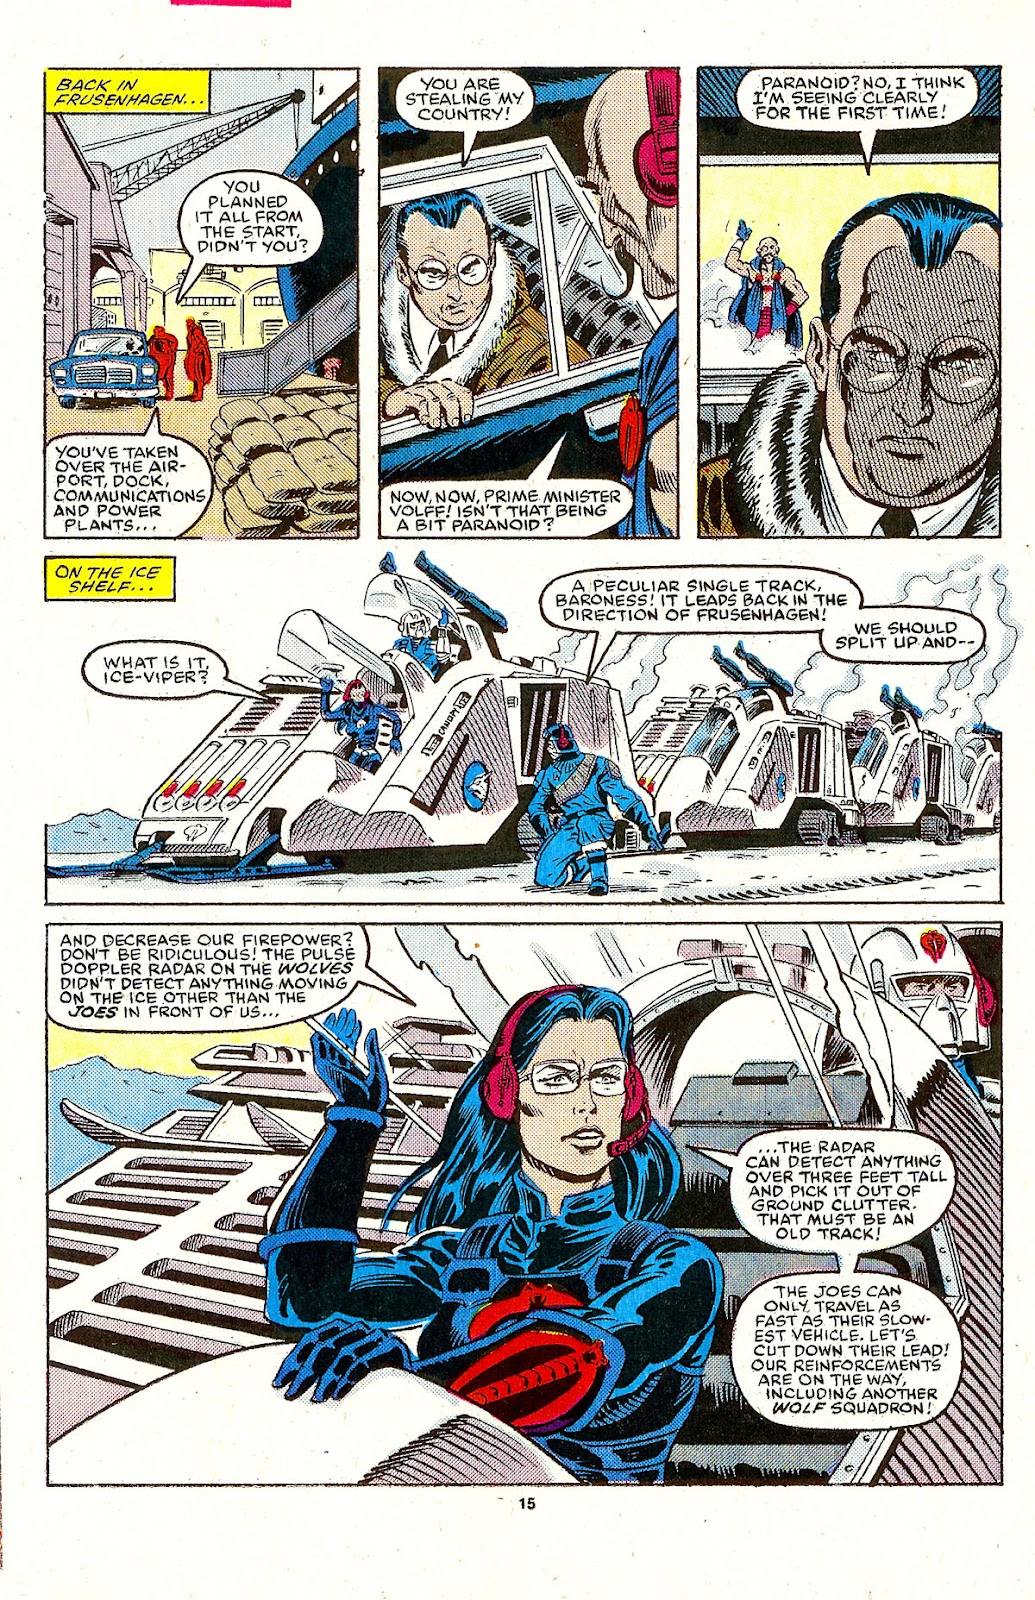 Is This Hero For Real 68 G.I. Joe: A Real American Hero #68 - Read G.I. Joe: A Real American Hero  Issue #68 Page 16